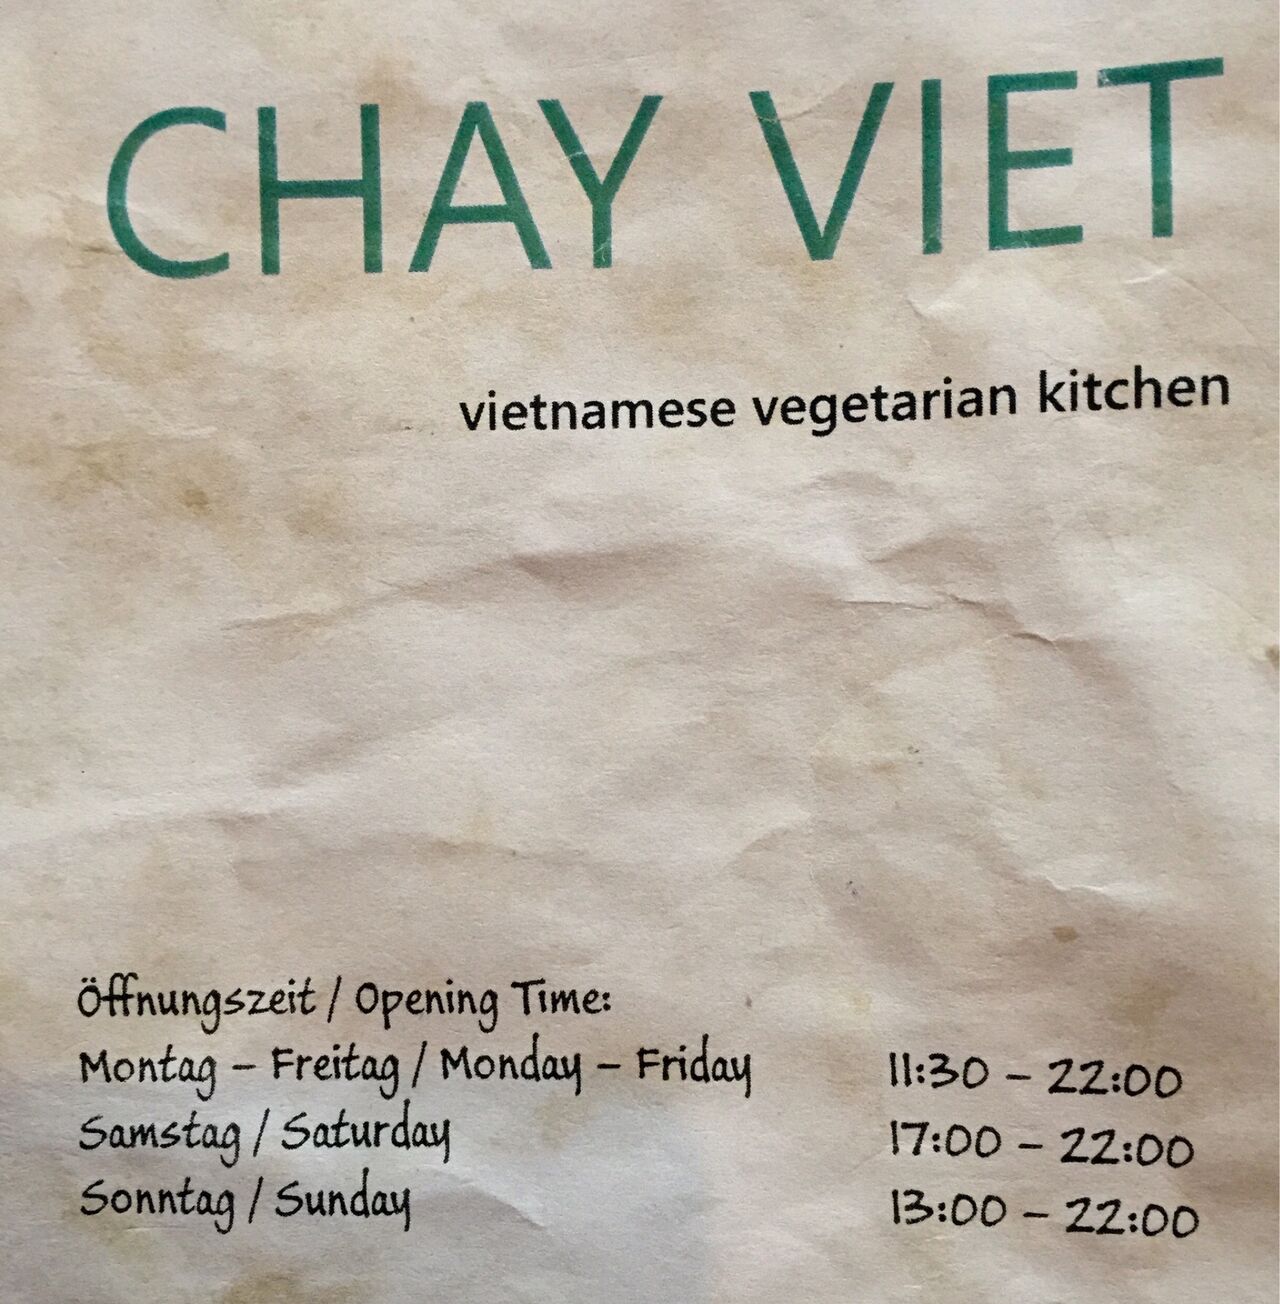 A photo of Chay Viet